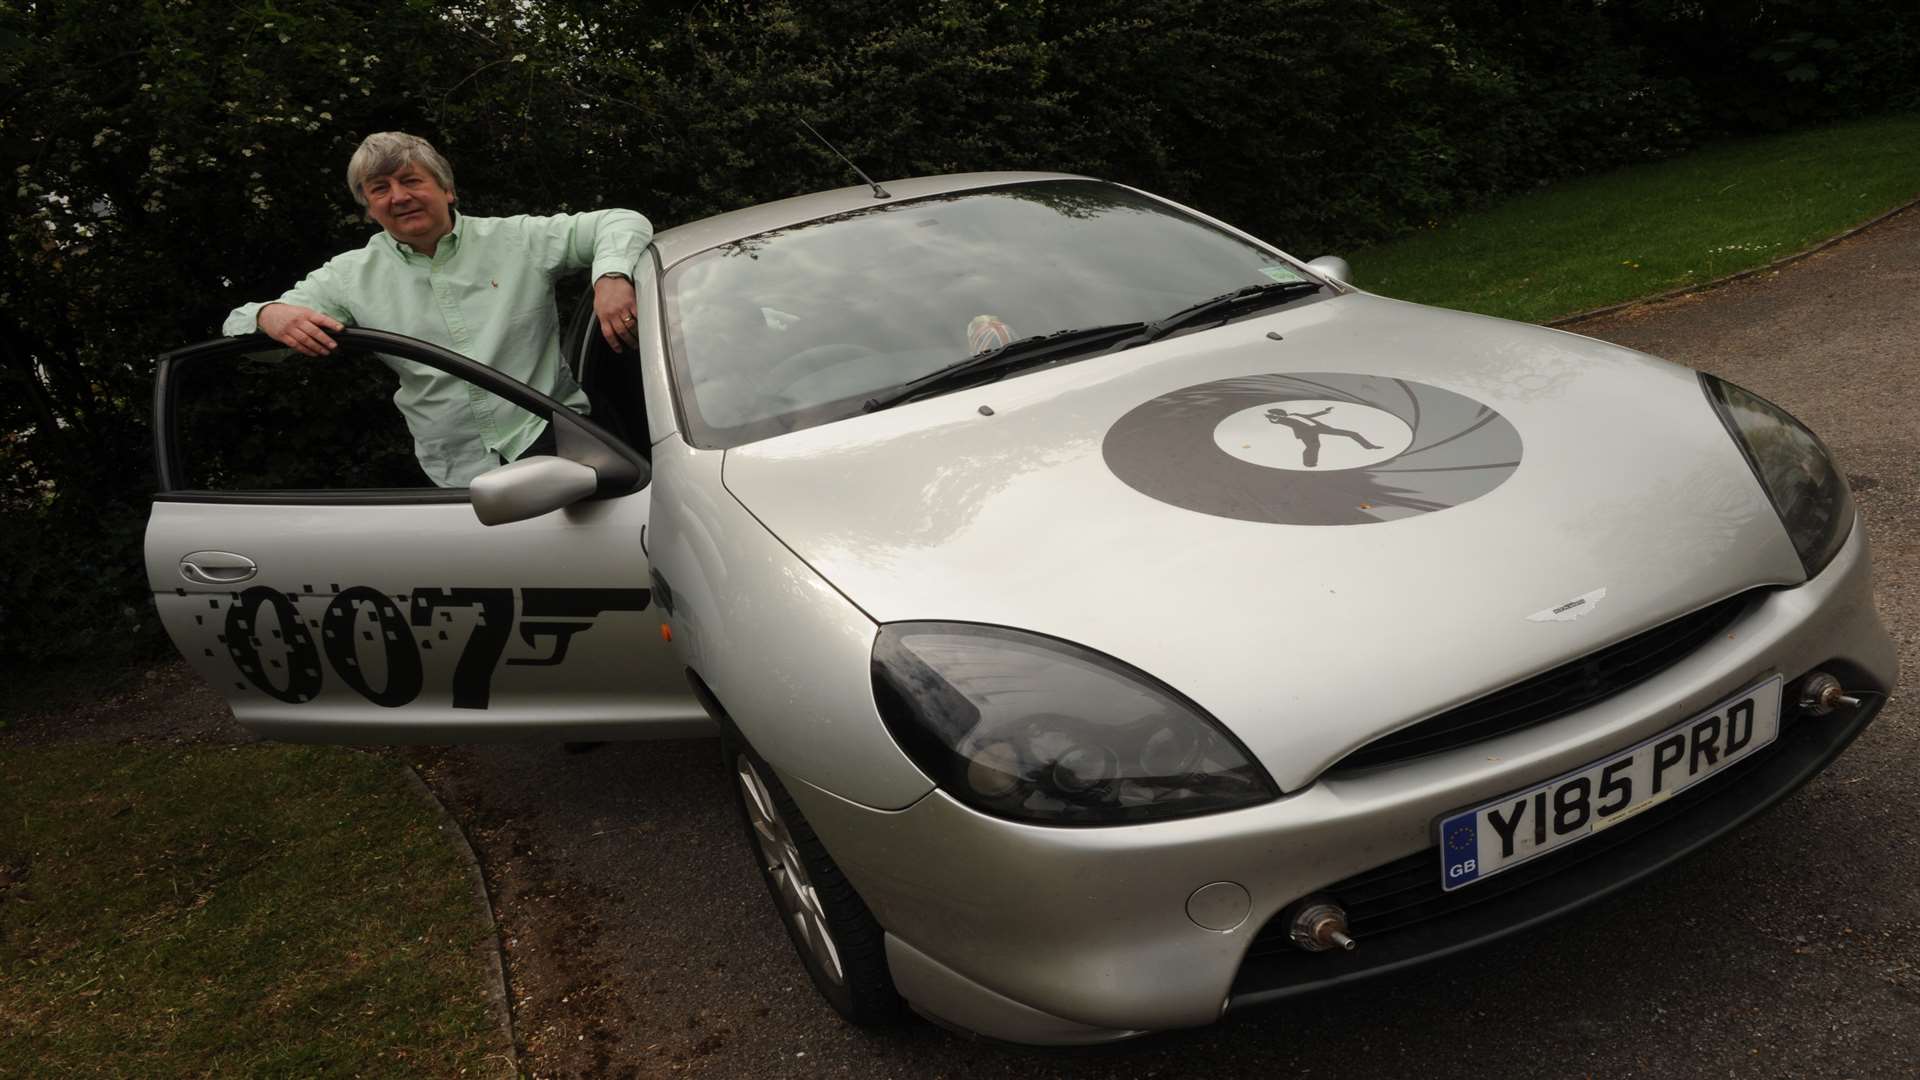 The 15-year-old Ford Puma has been customised with a James Bond theme